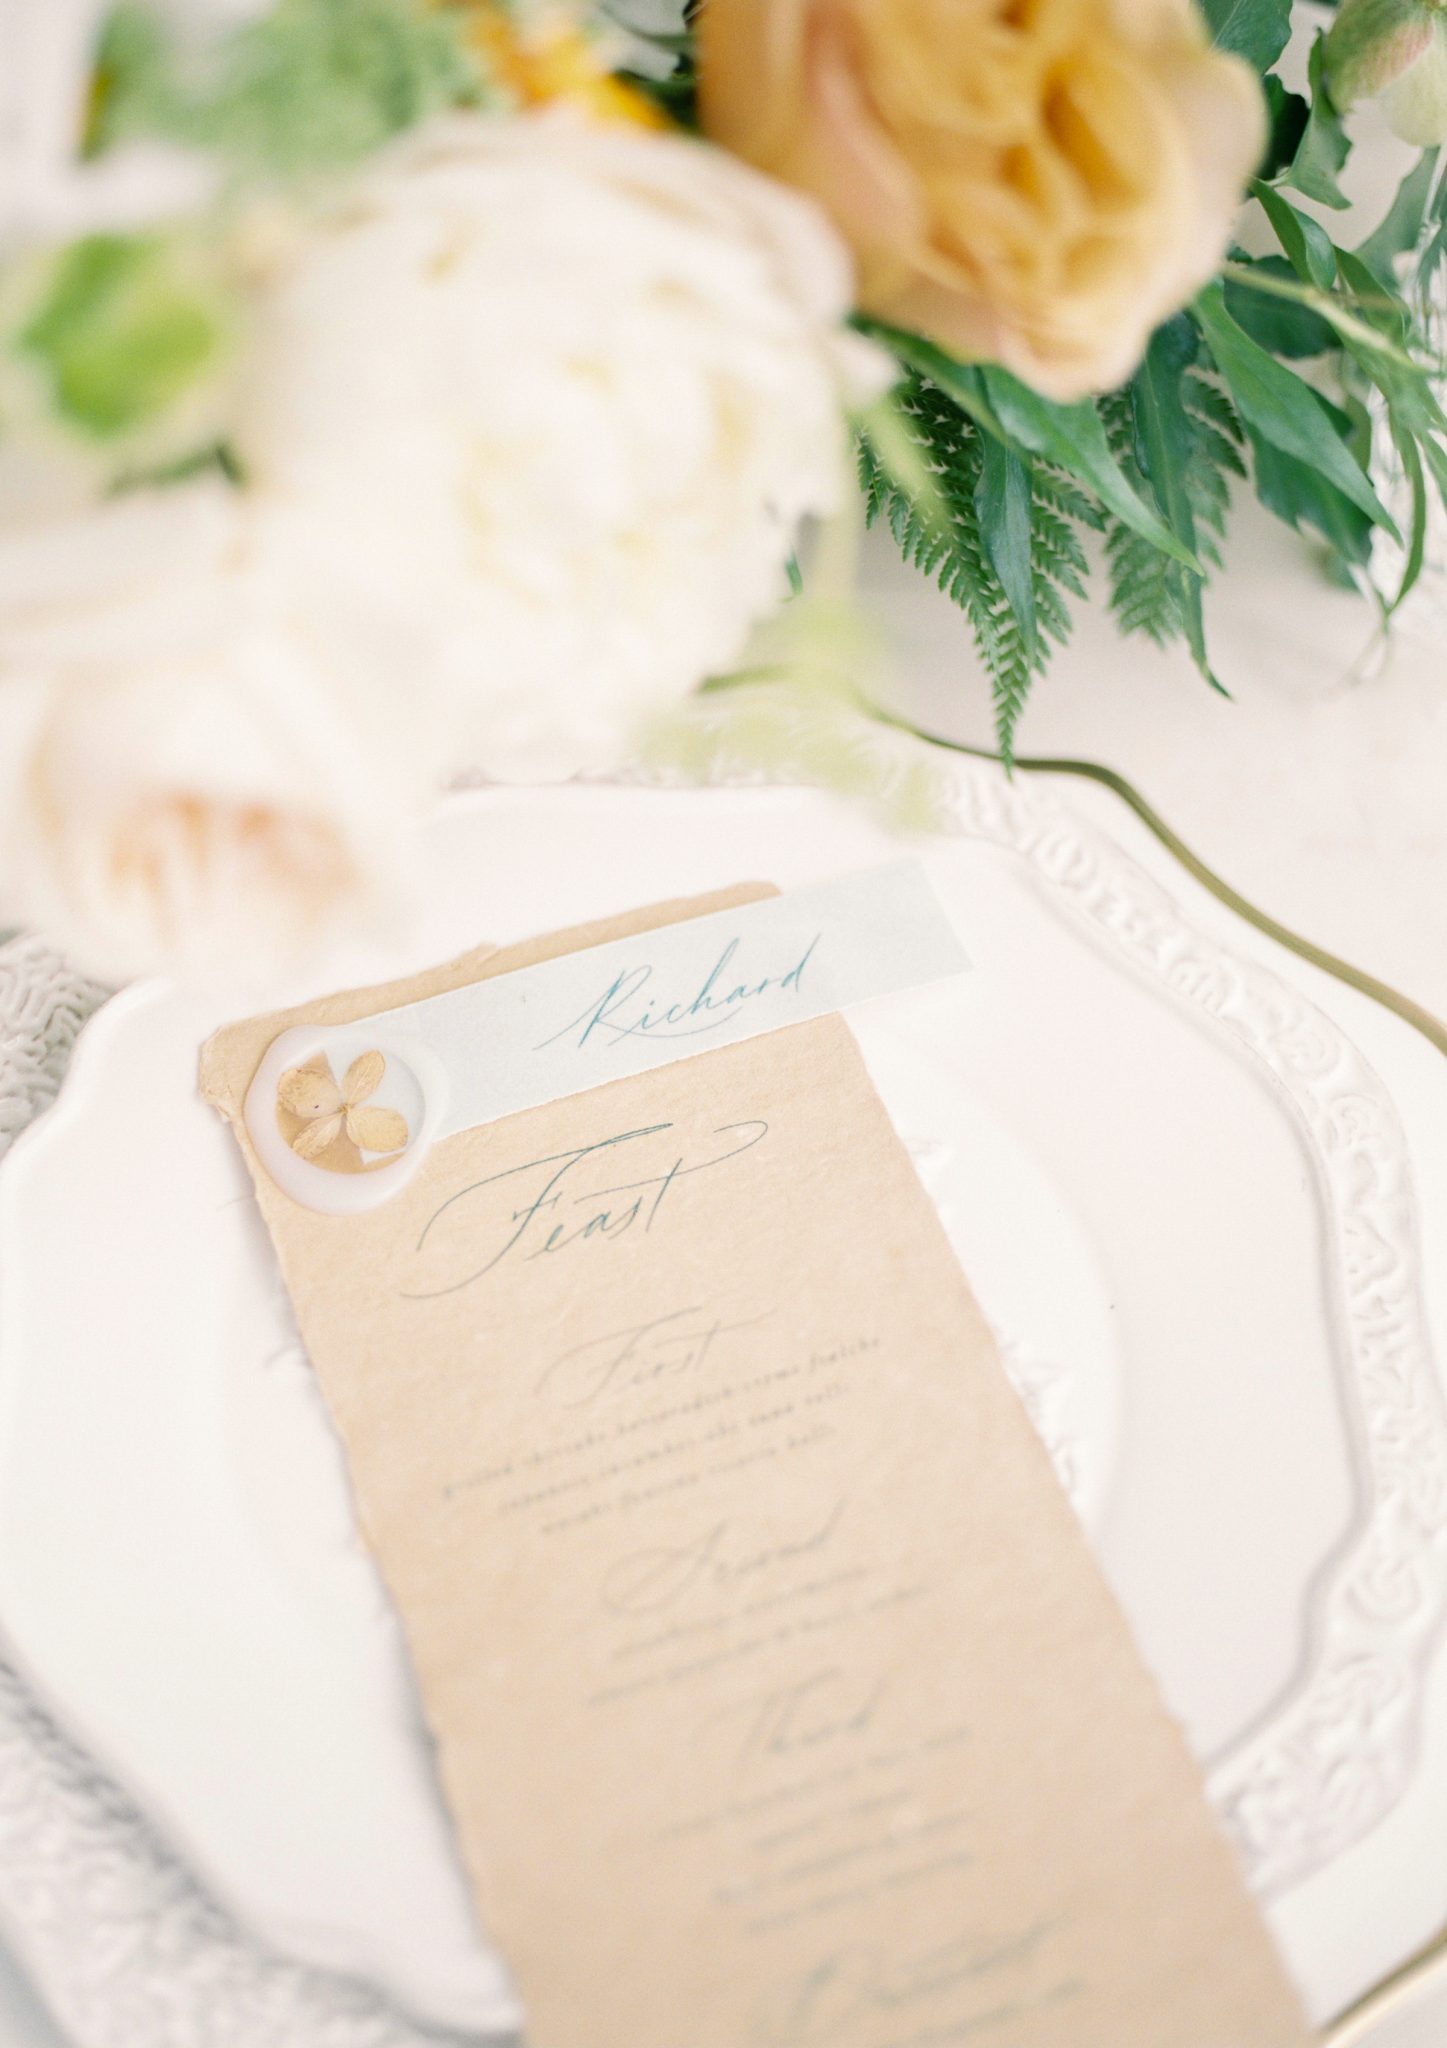 Craft paper wedding menu inspiration with orange and white floral accents